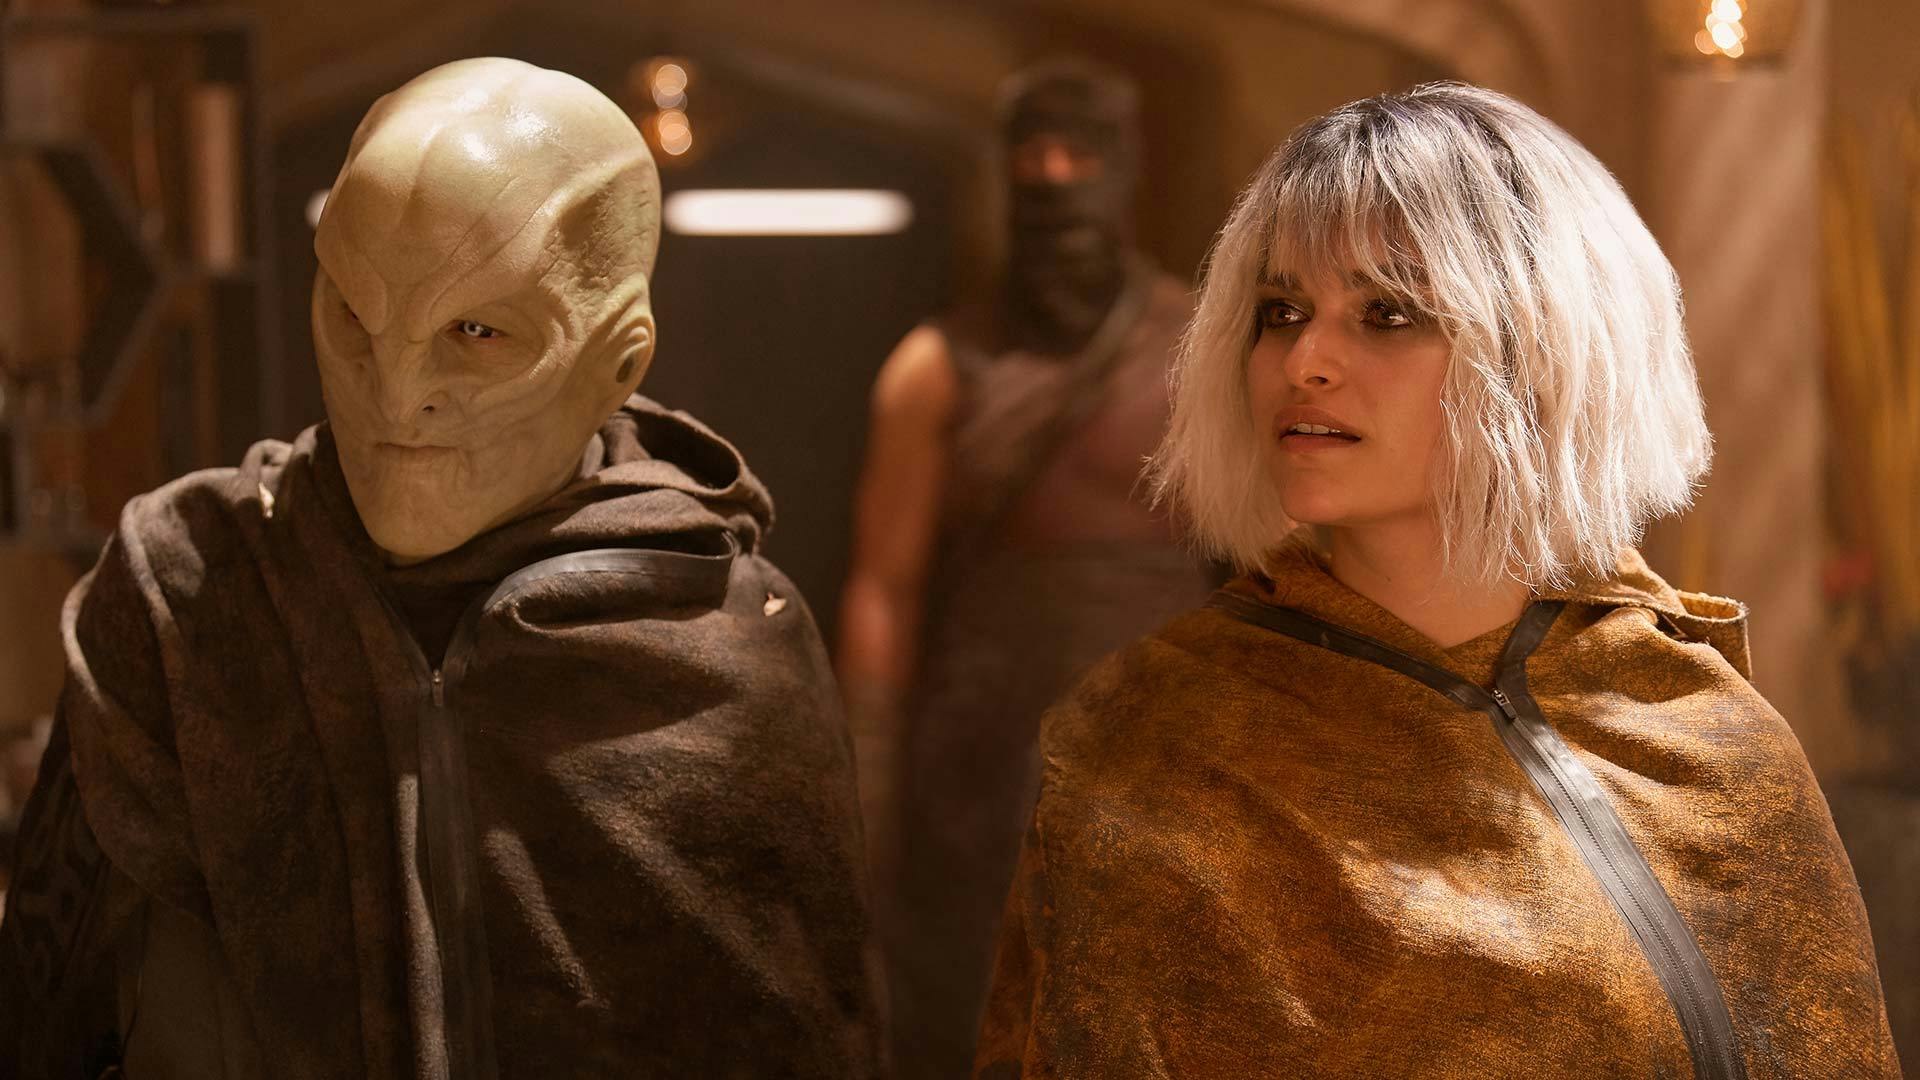 Elias Toufexis and Eve Harlow as L’ak and Moll on Star Trek: Discovery